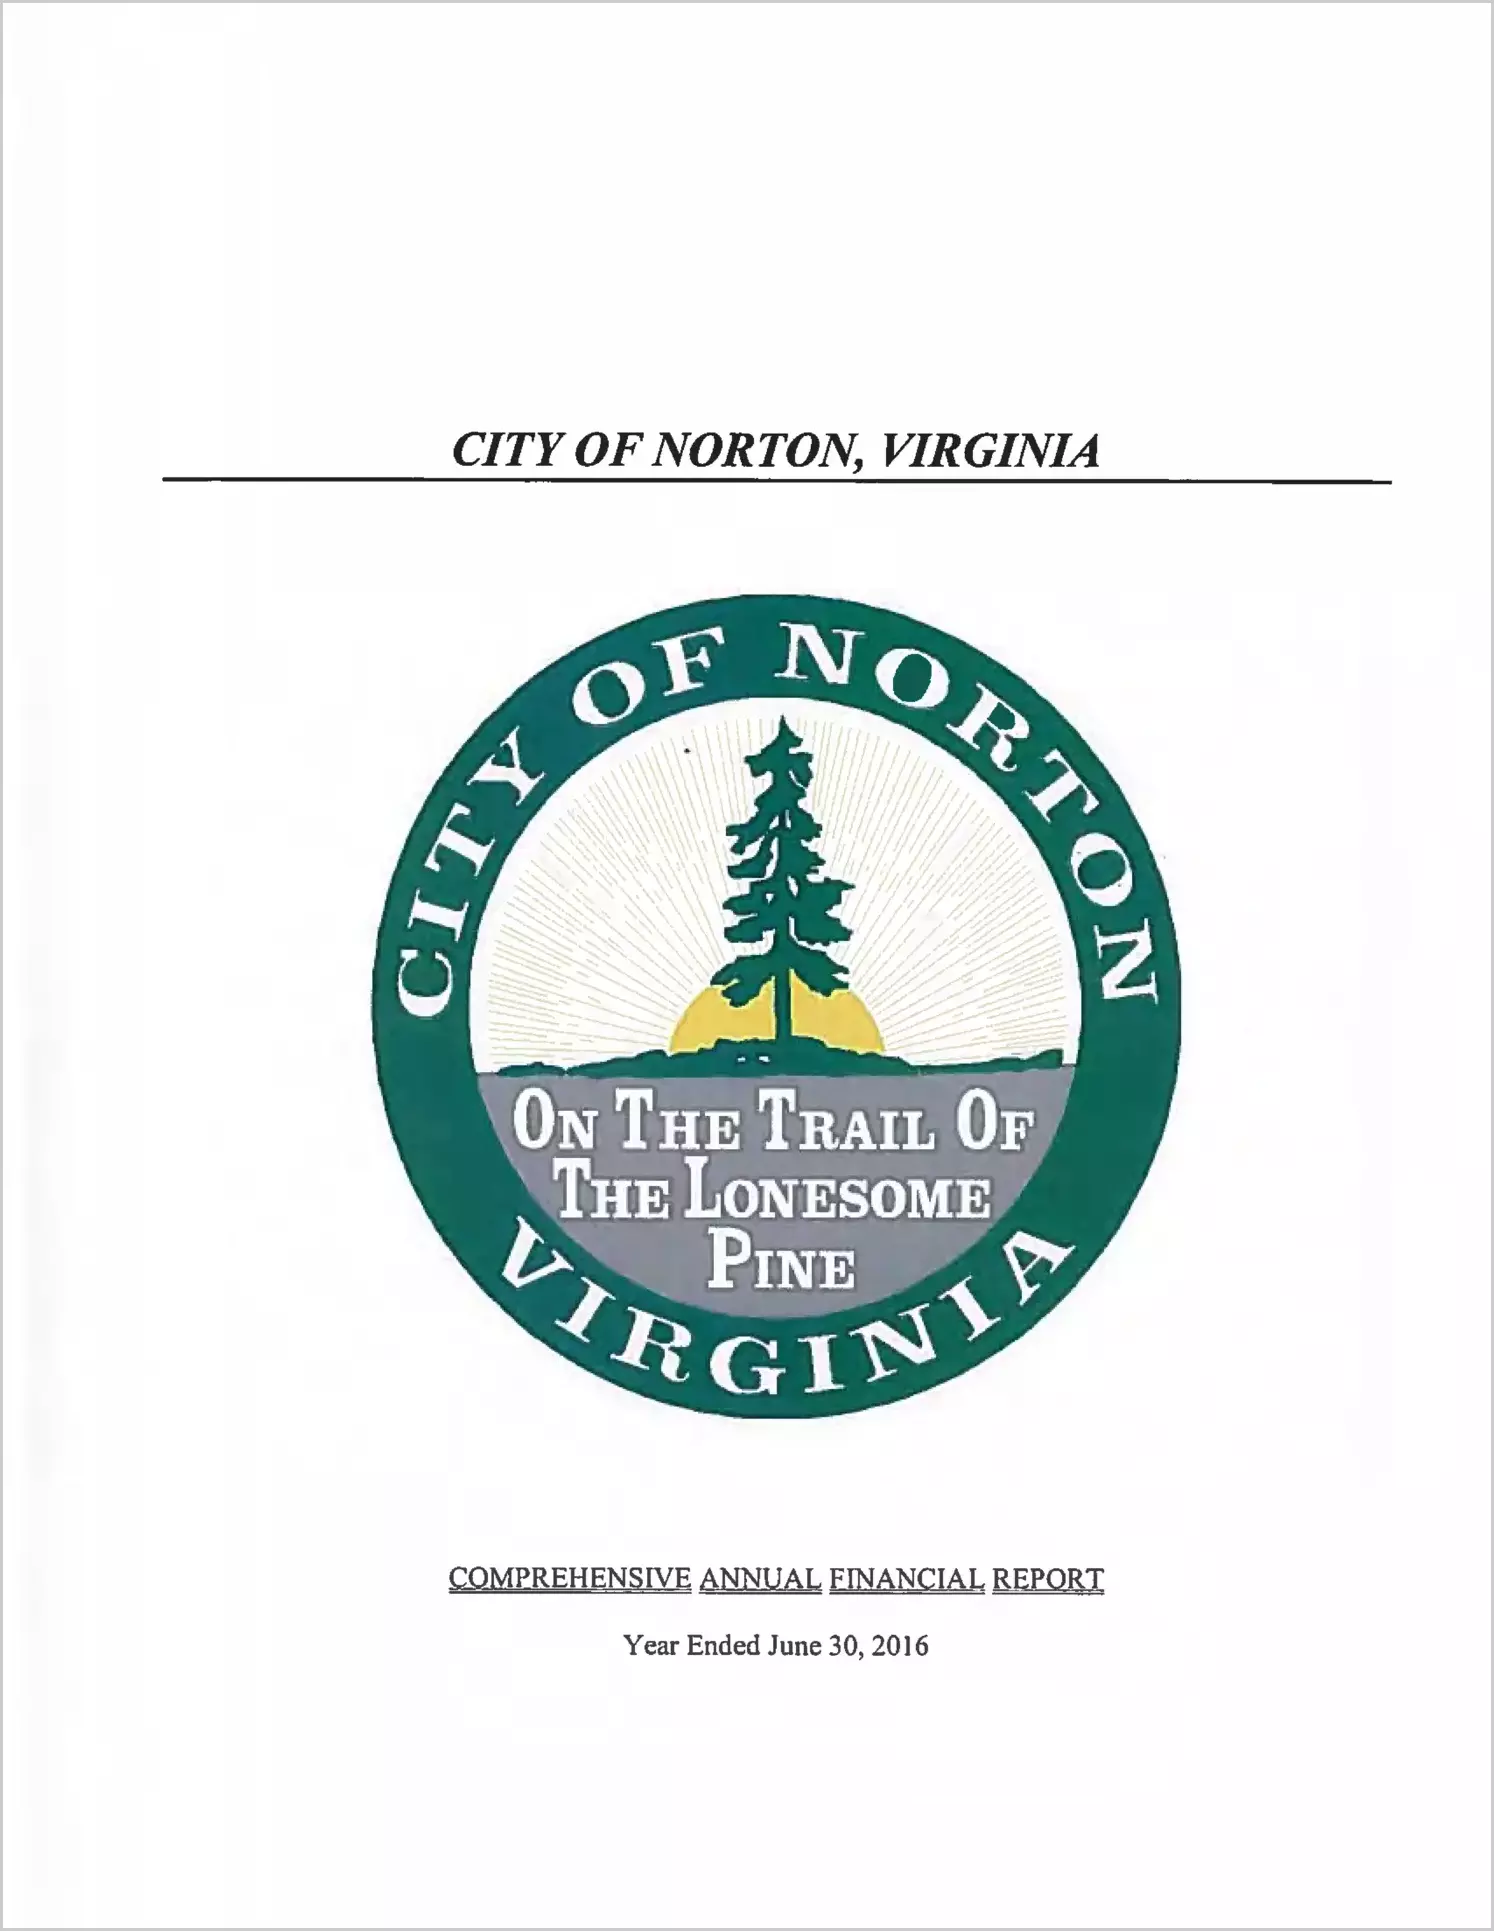 2016 Annual Financial Report for City of Norton